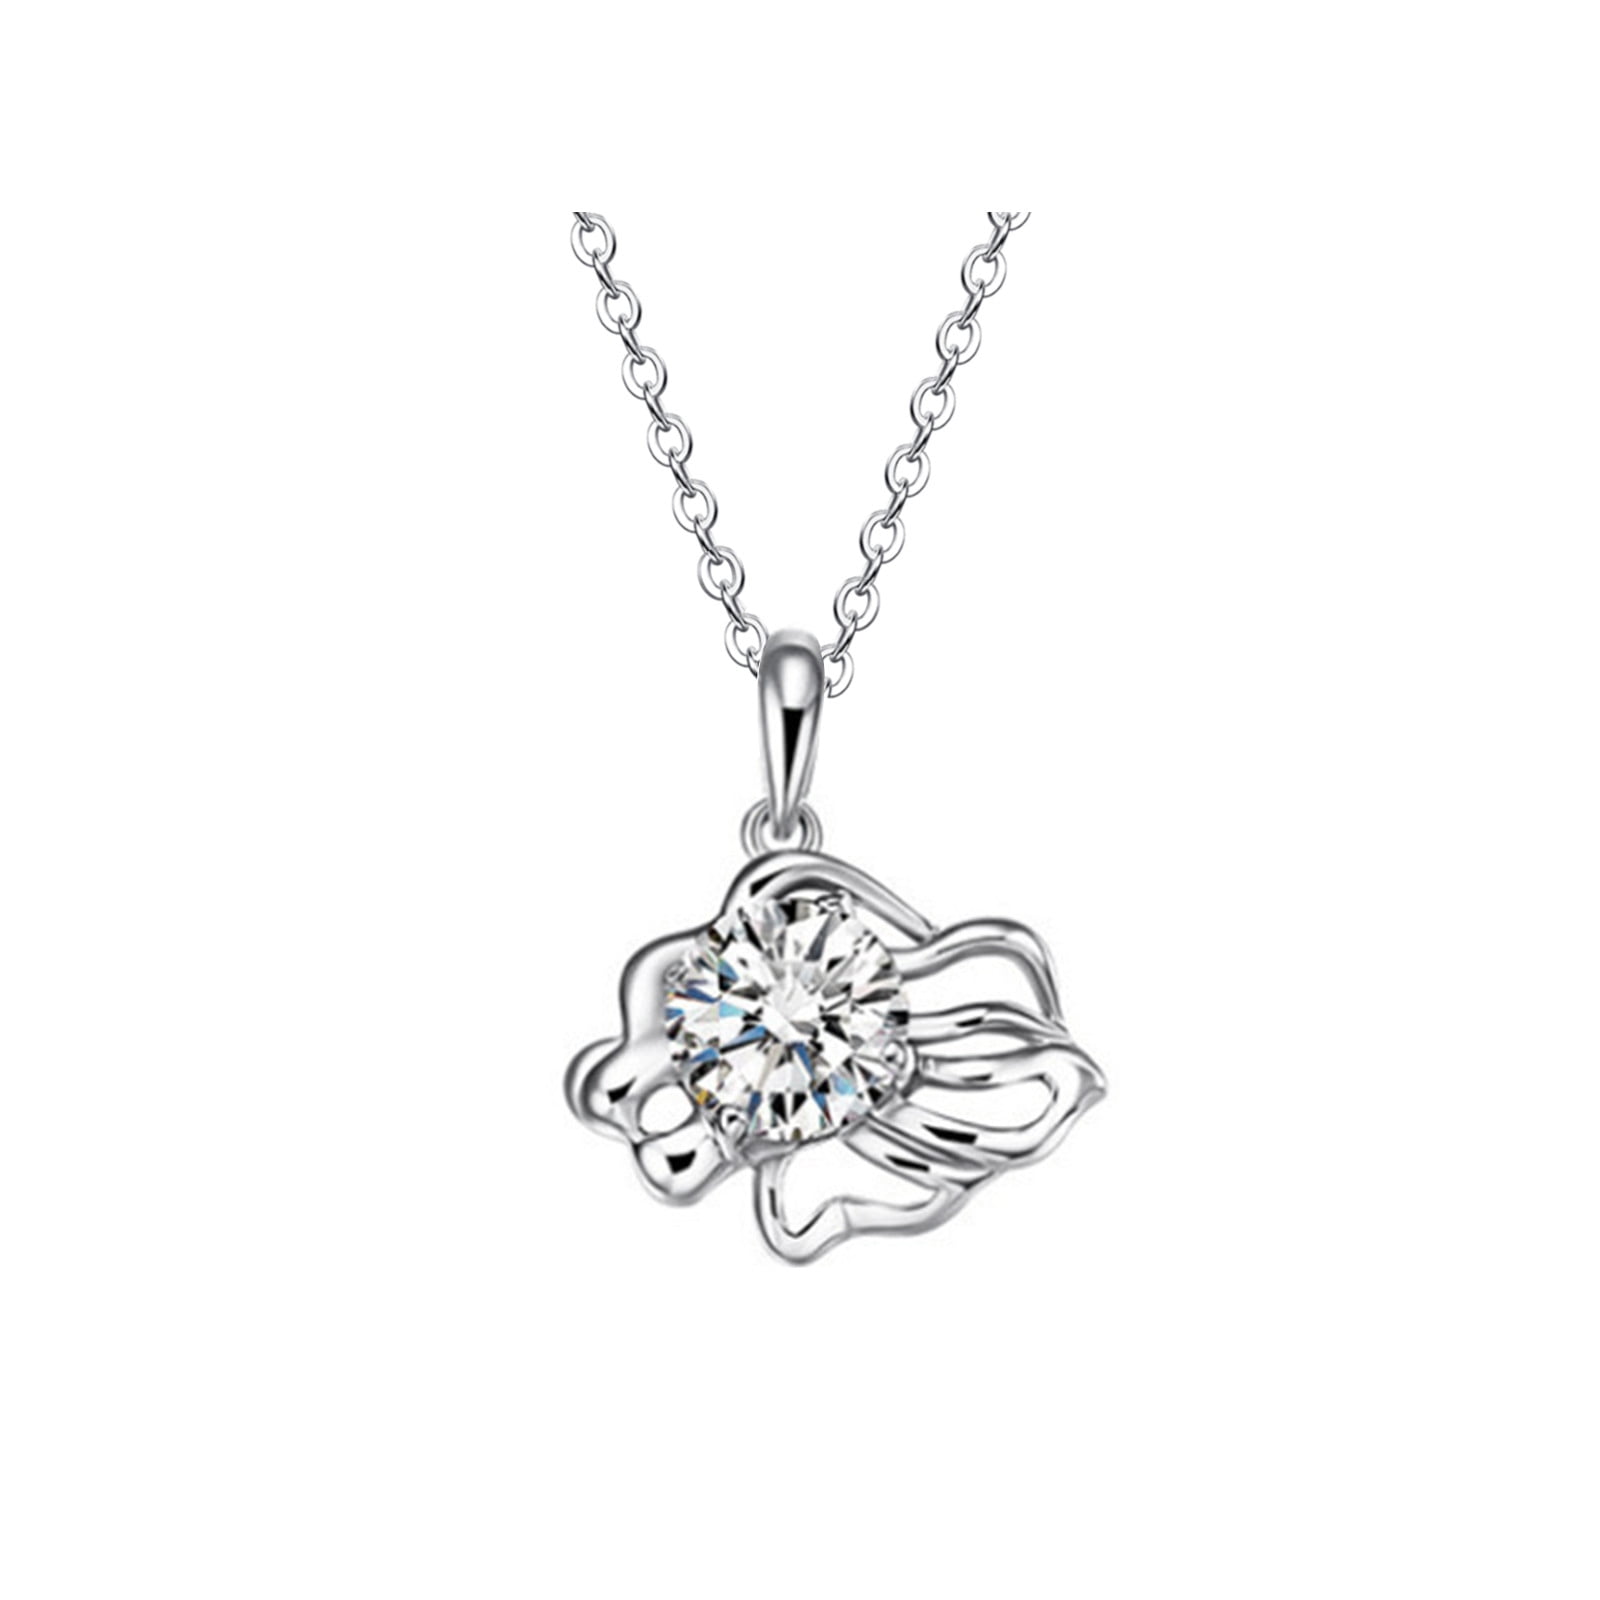 CAT KITTEN 925 Sterling Silver Necklace Chain and Charm 2139 